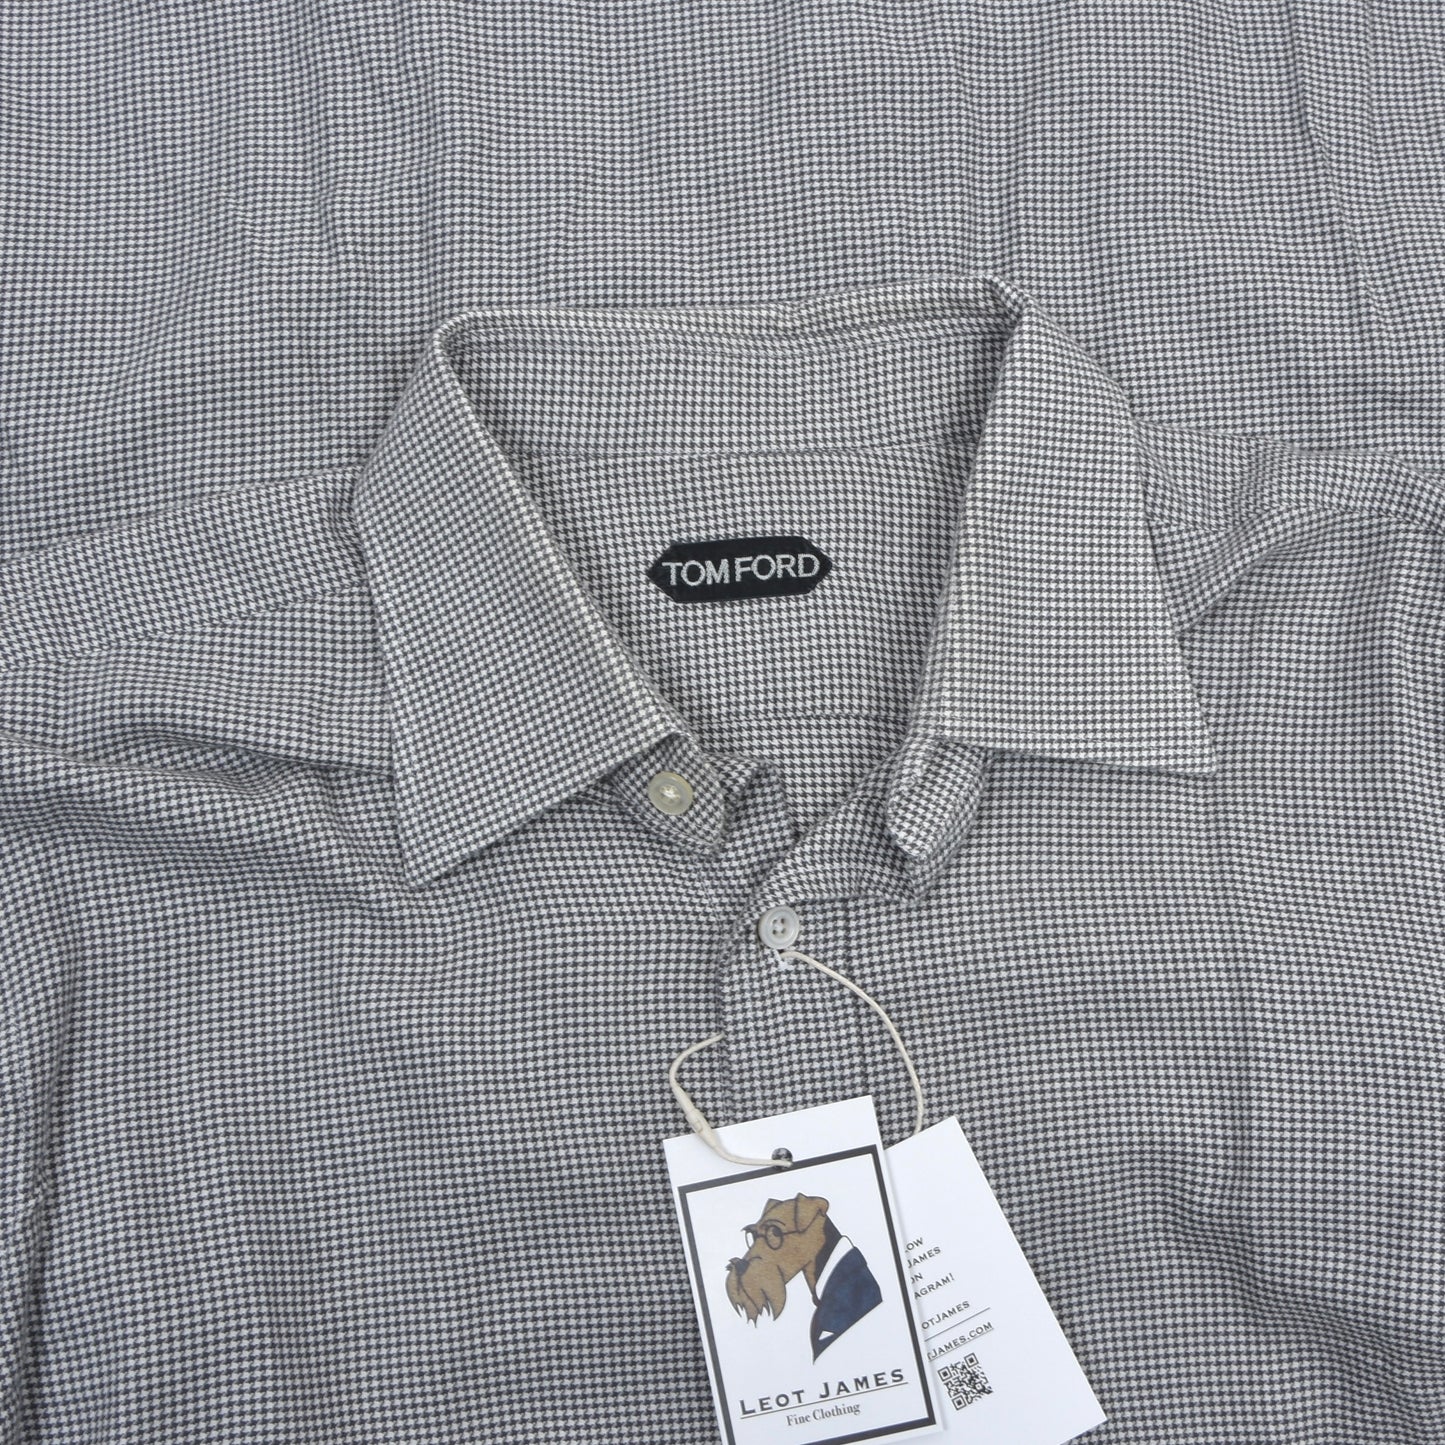 Tom Ford French Cuff Shirt Size 42 - Houndstooth